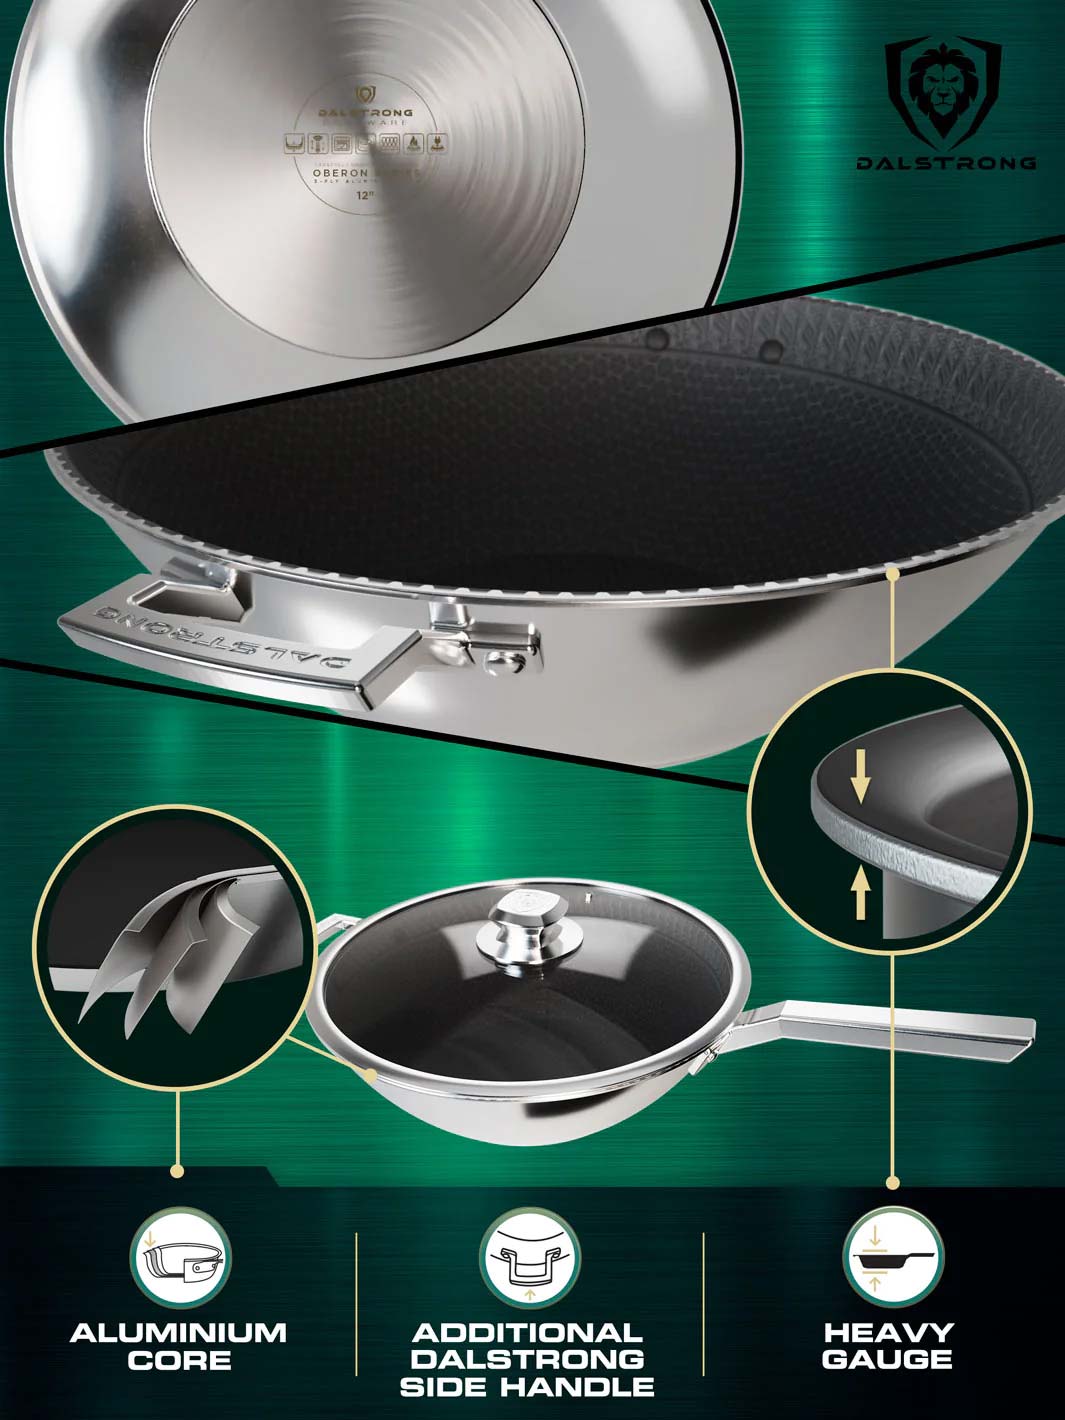 Dalstrong oberon series eterna non-stick 12 inch frying pan wok featuring it's aluminum core and handle.